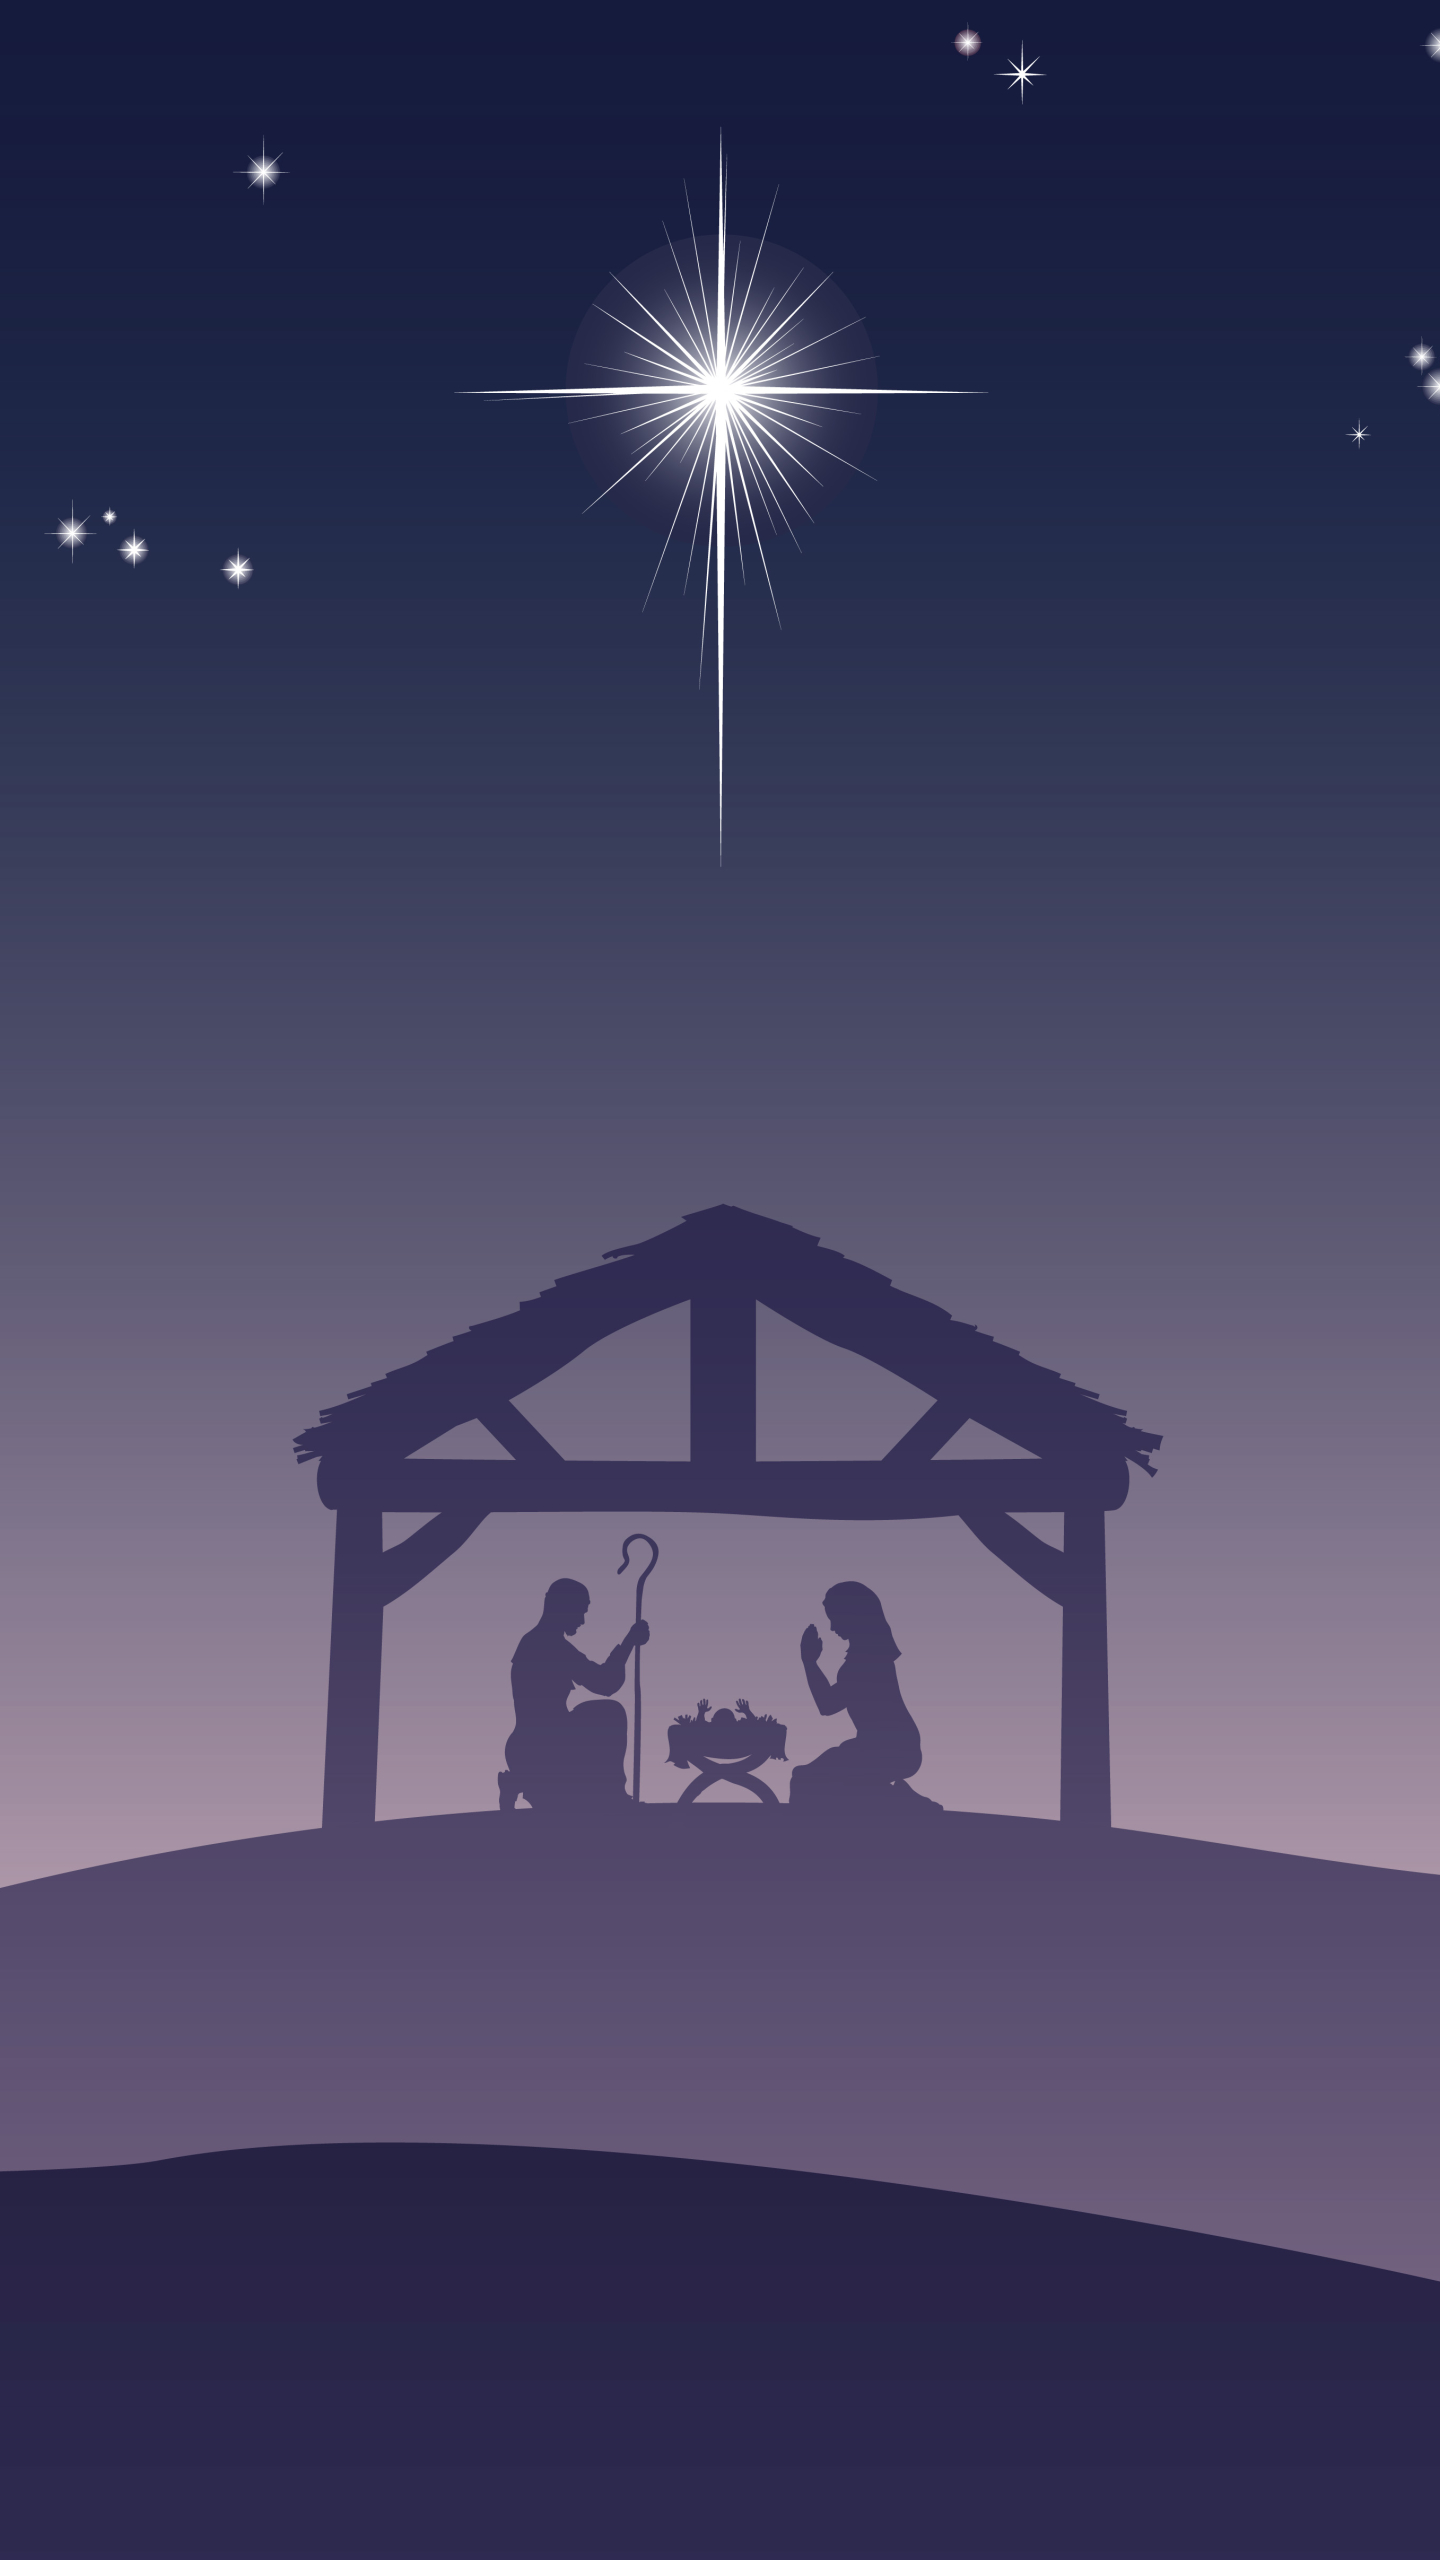 jesus, mary (mother of jesus), holiday, christmas, camel, the three wise men, town, night, stars